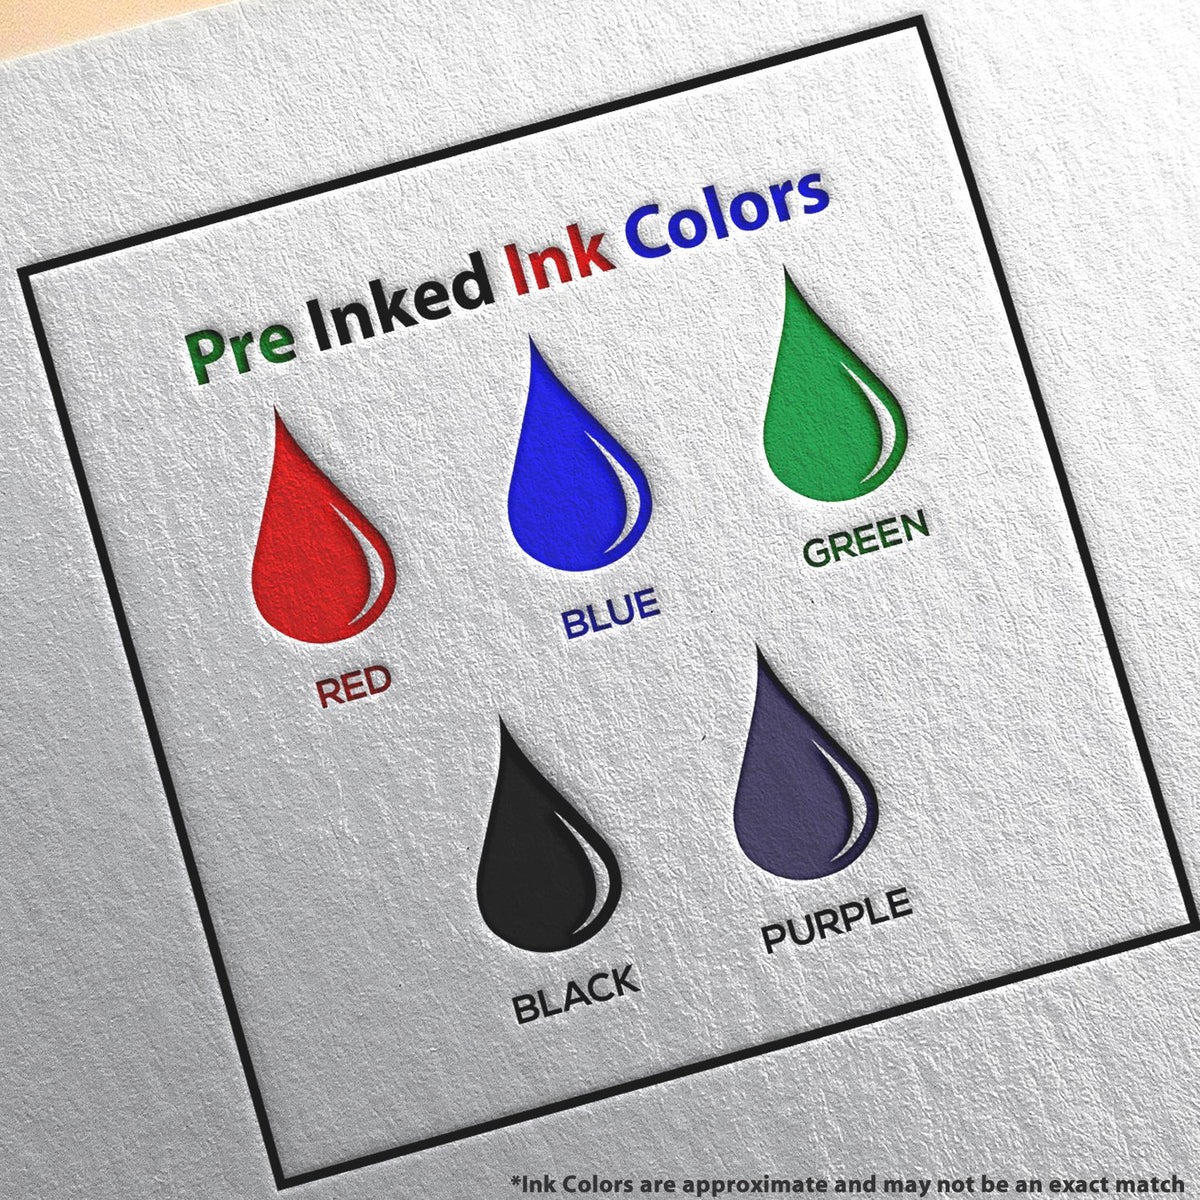 A picture showing the different ink colors or hues available for the Slim Pre-Inked Connecticut Professional Engineer Seal Stamp product.